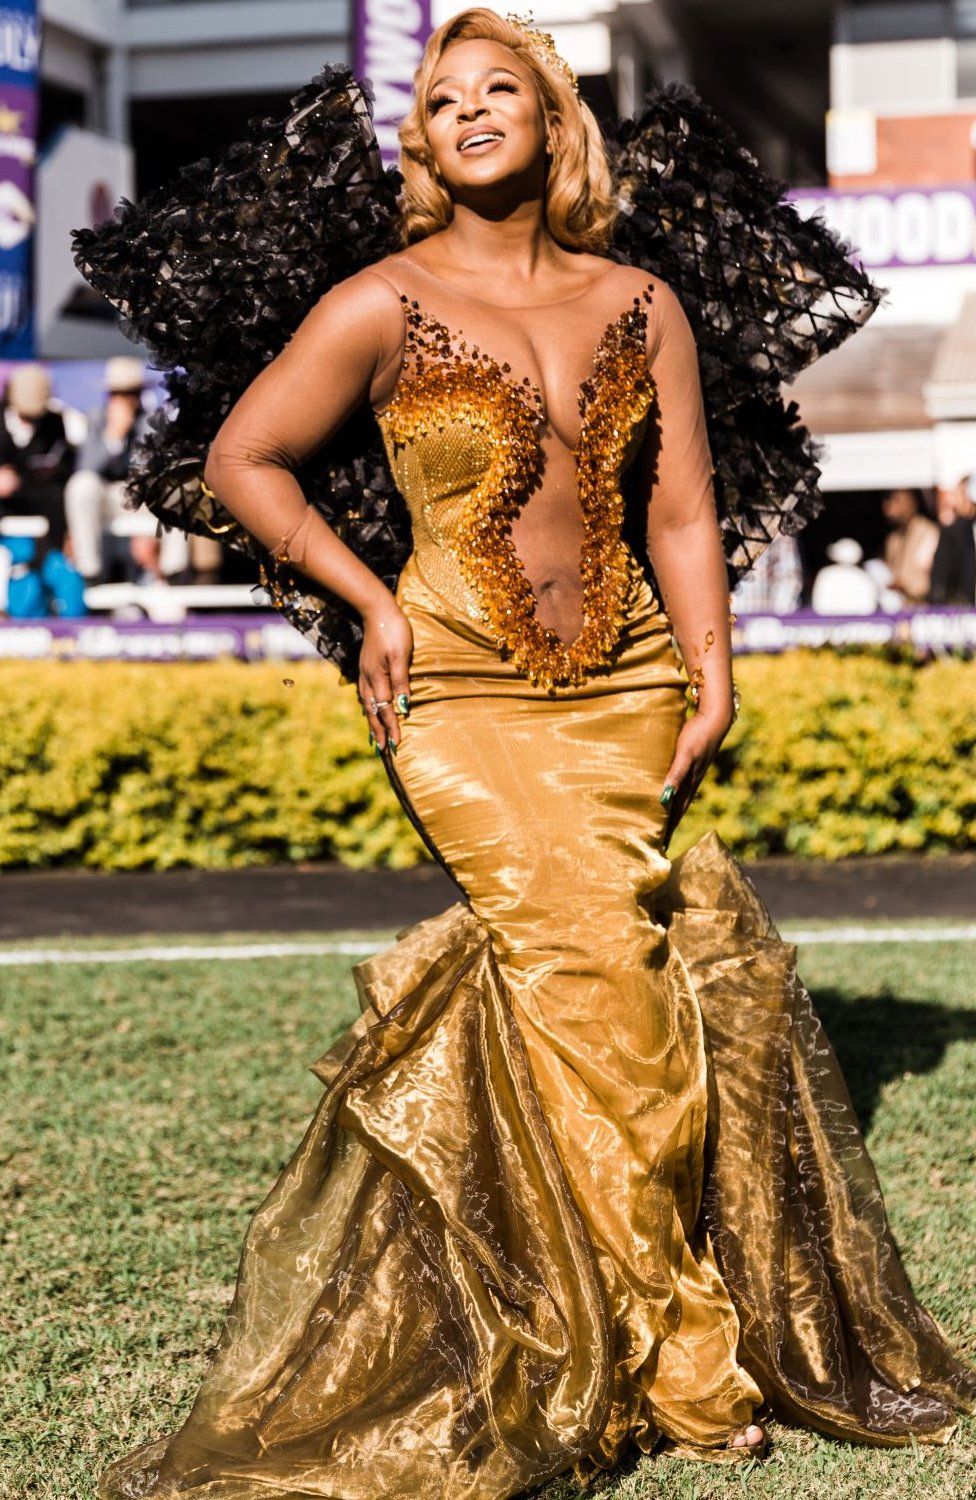 South African actress and celebrity Jessica Nkosi poses for a photographer at the 2022 editon of the Durban July horse race in Durban on July 2, 2022.